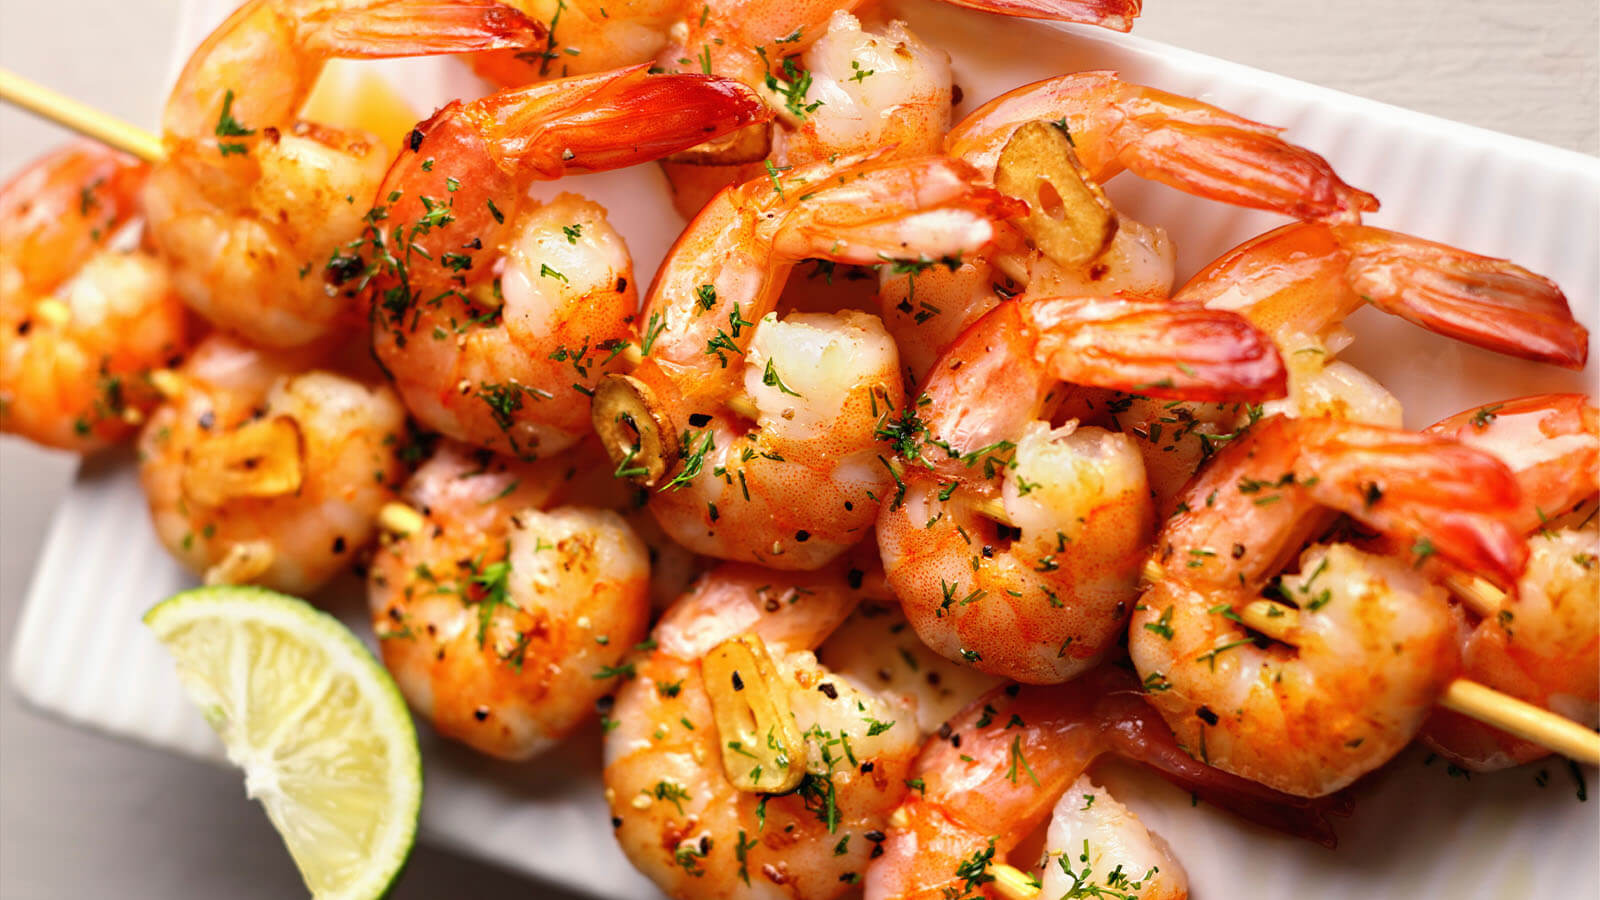 What To Have With Shrimp Skewers : Shrimp Kebab With Garlic Butter Rasa ...